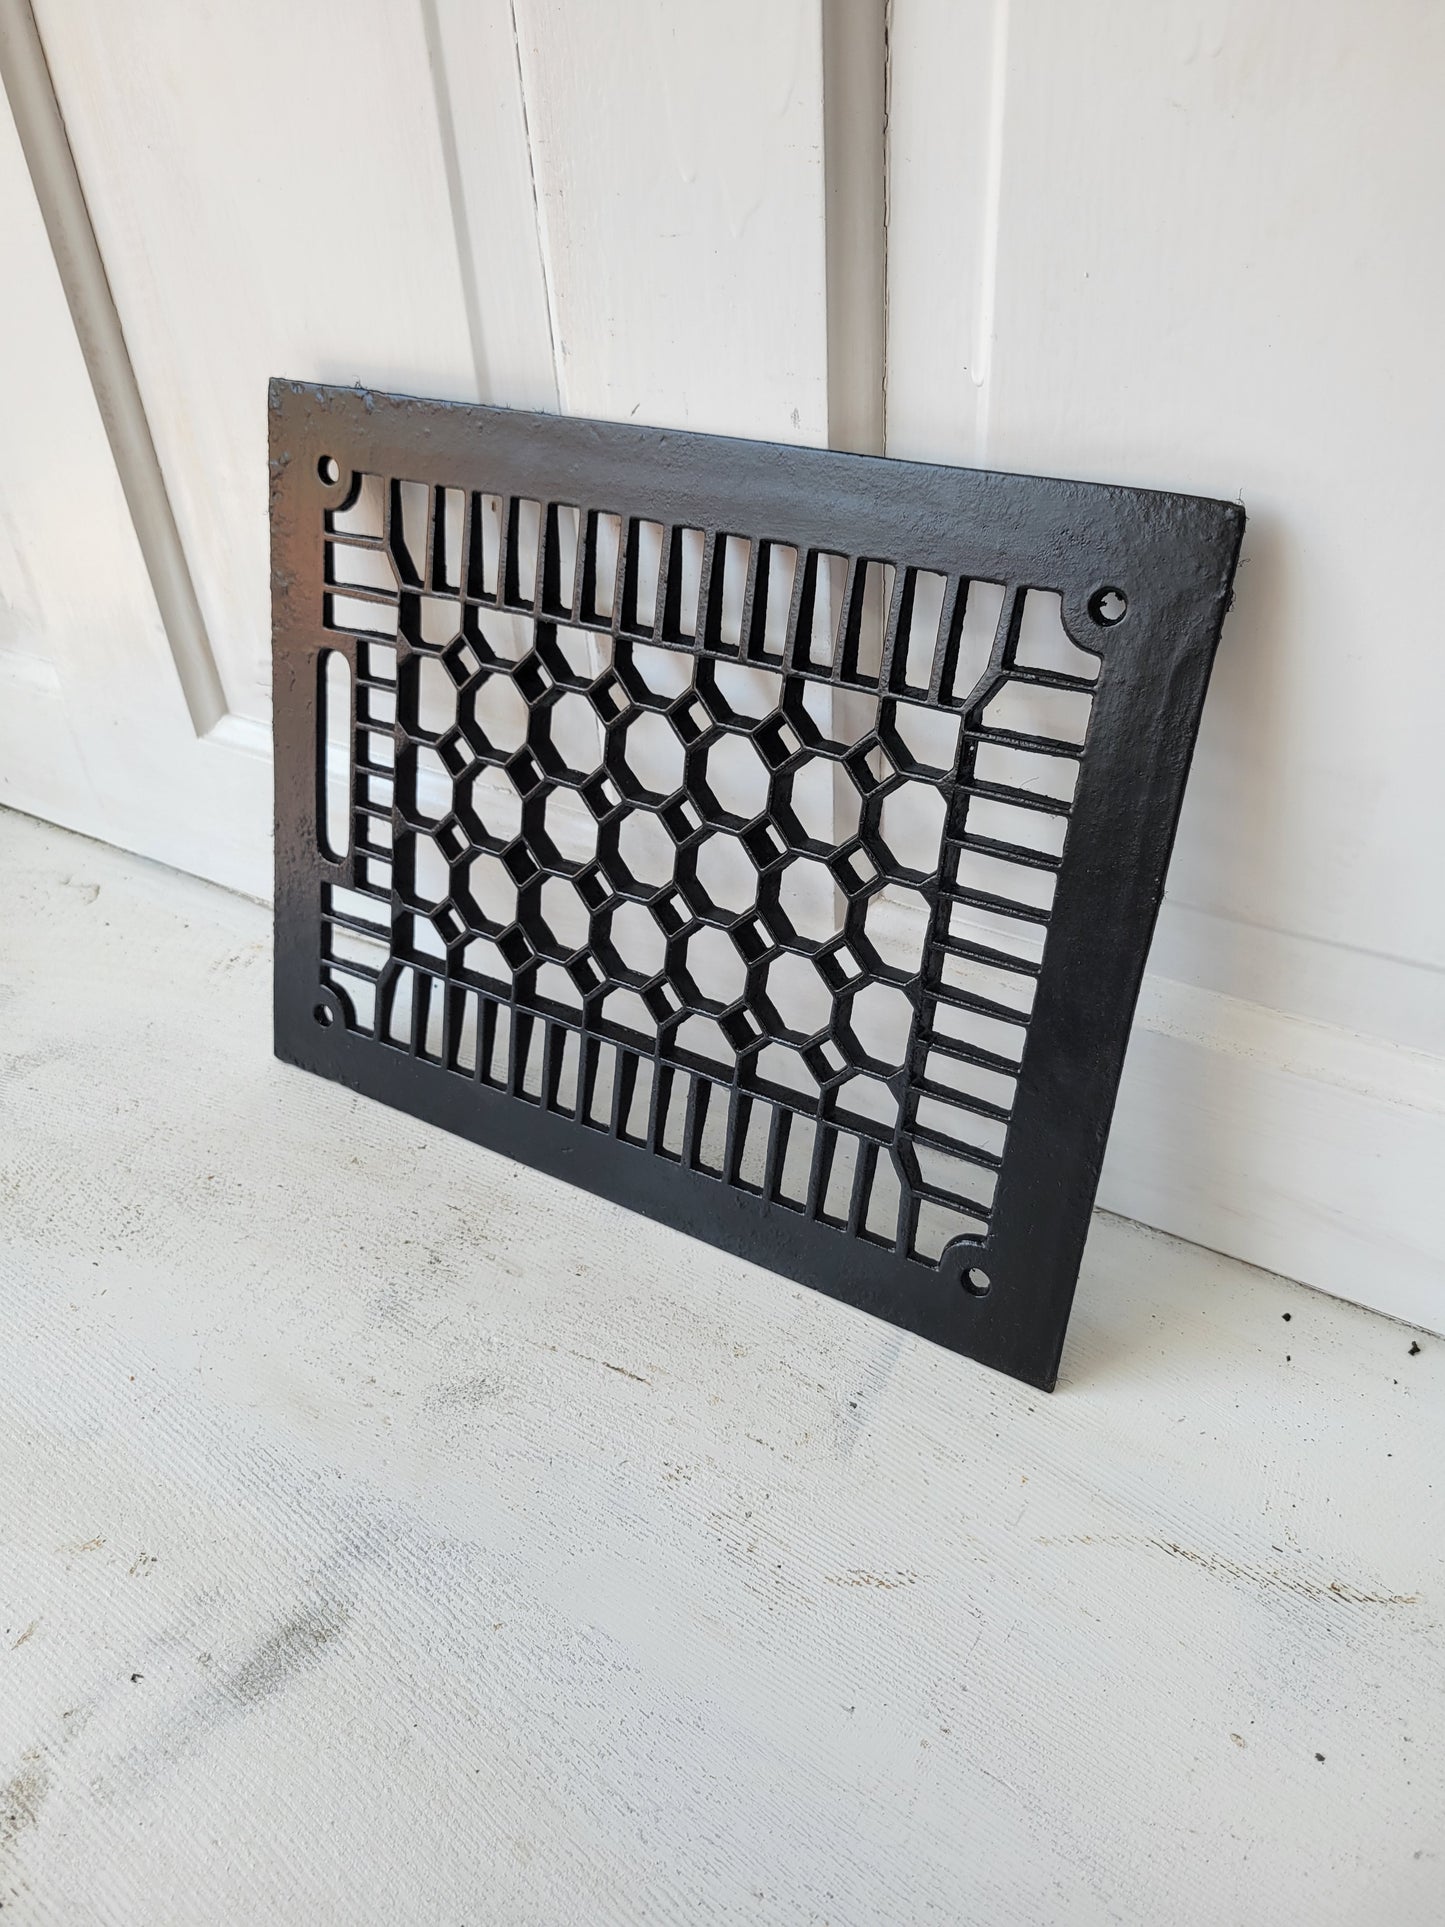 Black 11 x 14 Antique Cast Iron Working Vent Cover, Floor Register Cover with Dampers #062001